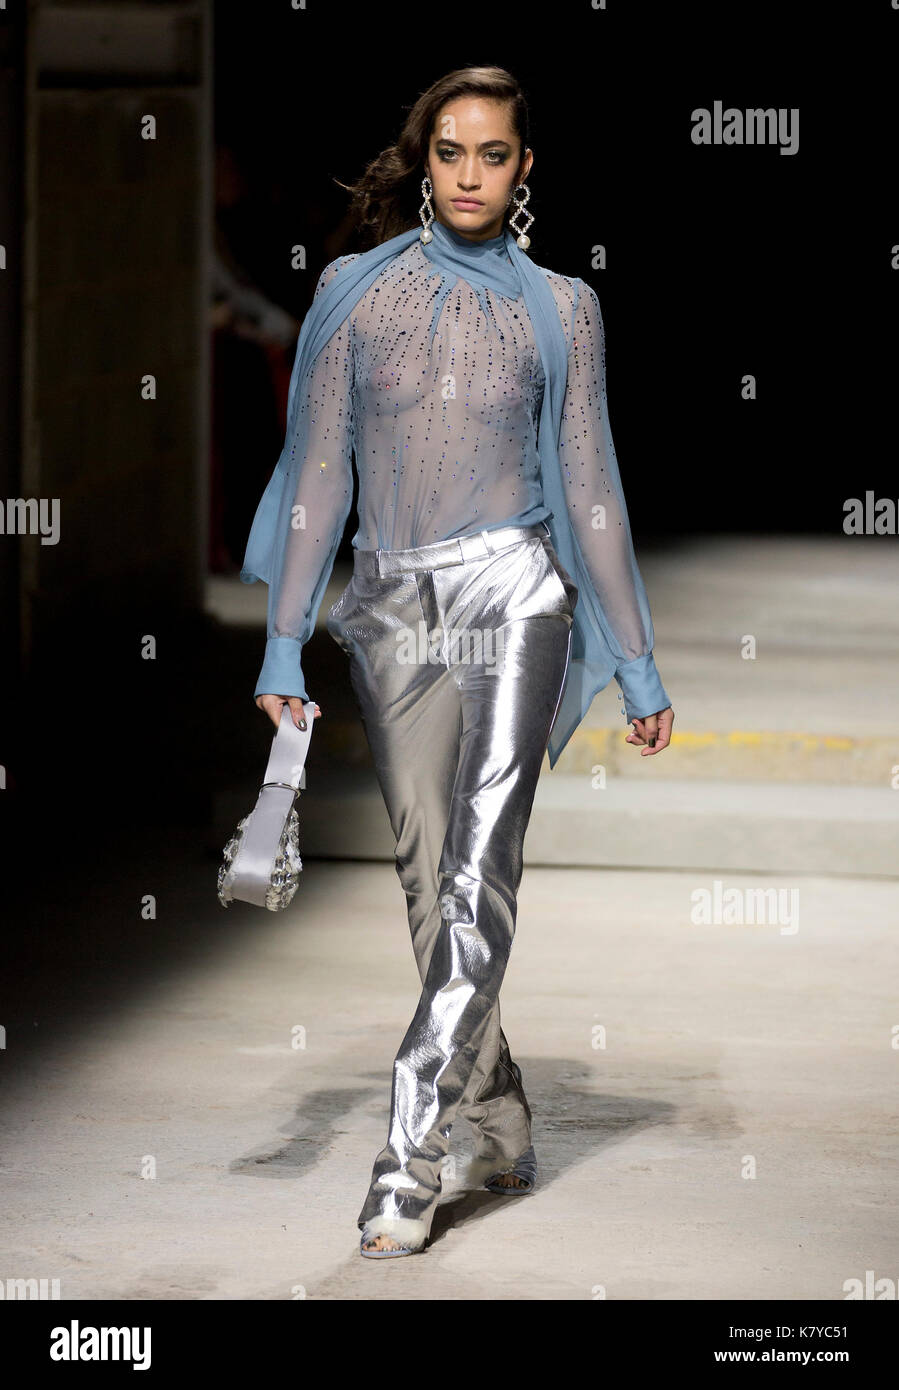 Models on the catwalk during the TOPSHOP London Fashion Week SS18 Stock  Photo - Alamy